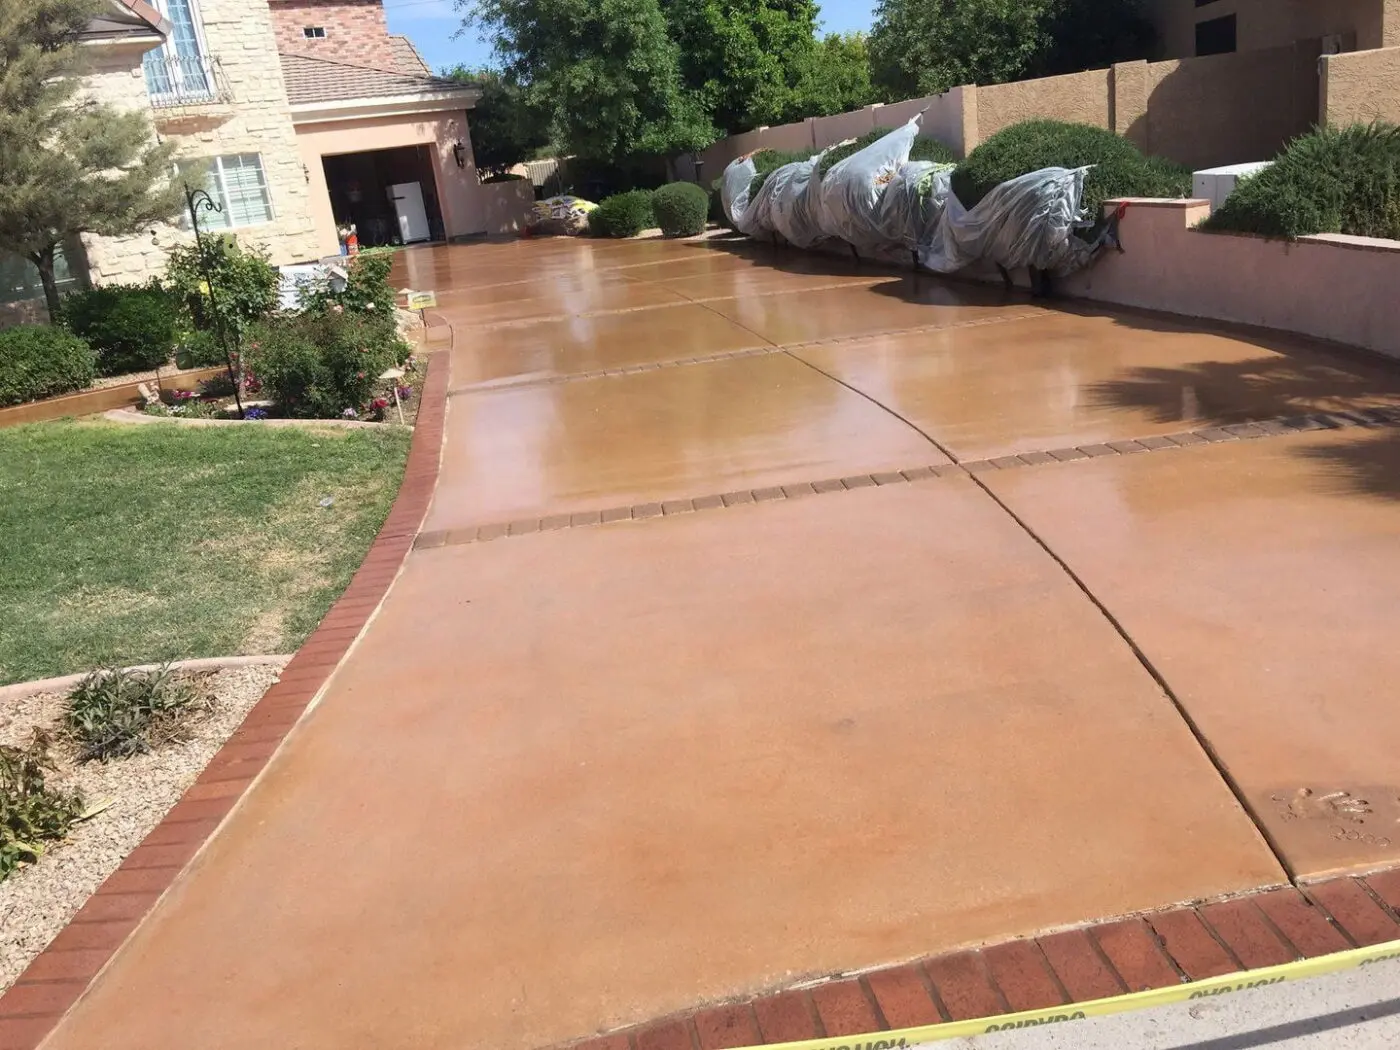 stained concrete driveway in an orange color in front of a home in Sparks NV